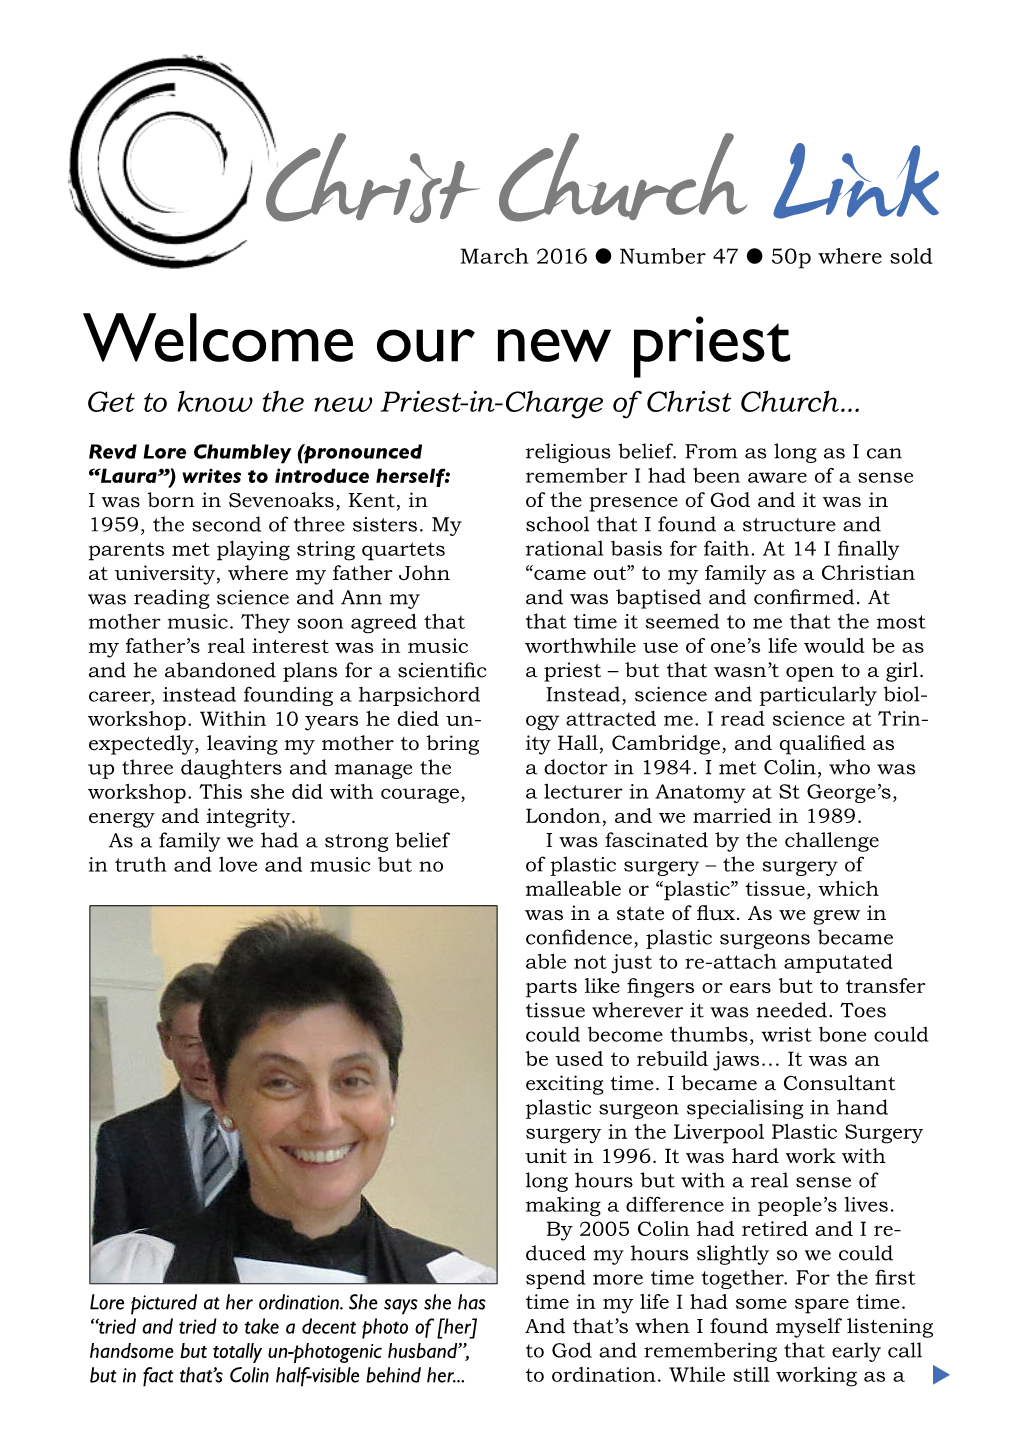 Our New Priest Get to Know the New Priest-In-Charge of Christ Church